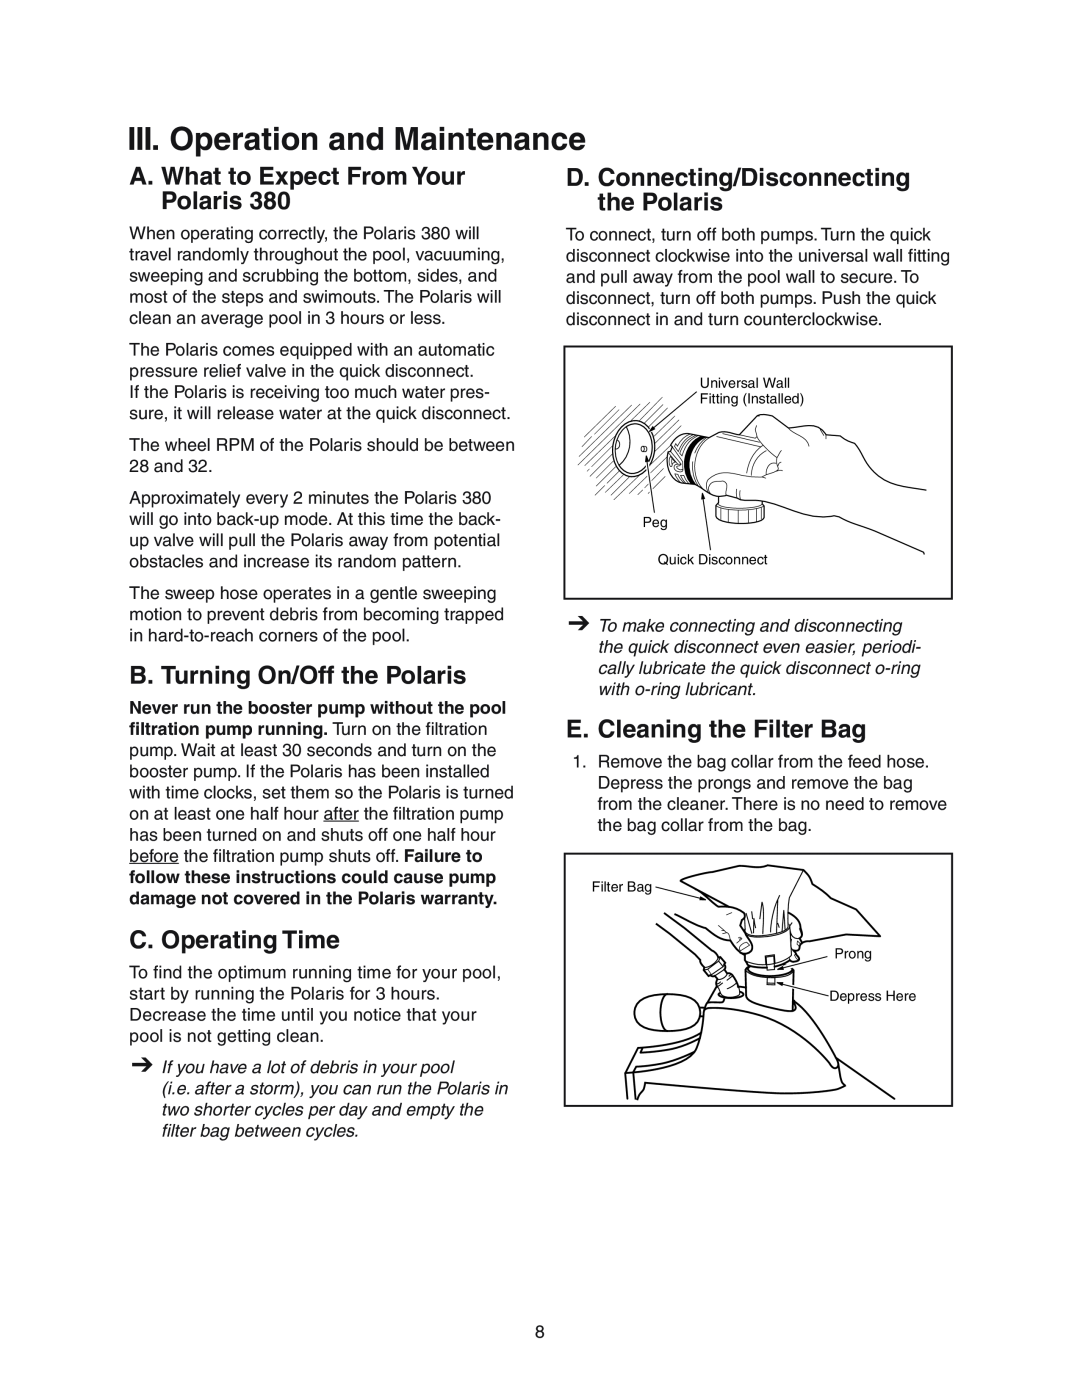 Polaris 380 owner manual III. Operation and Maintenance, A. What to Expect From Your Polaris, B. Turning On/Off the Polaris 